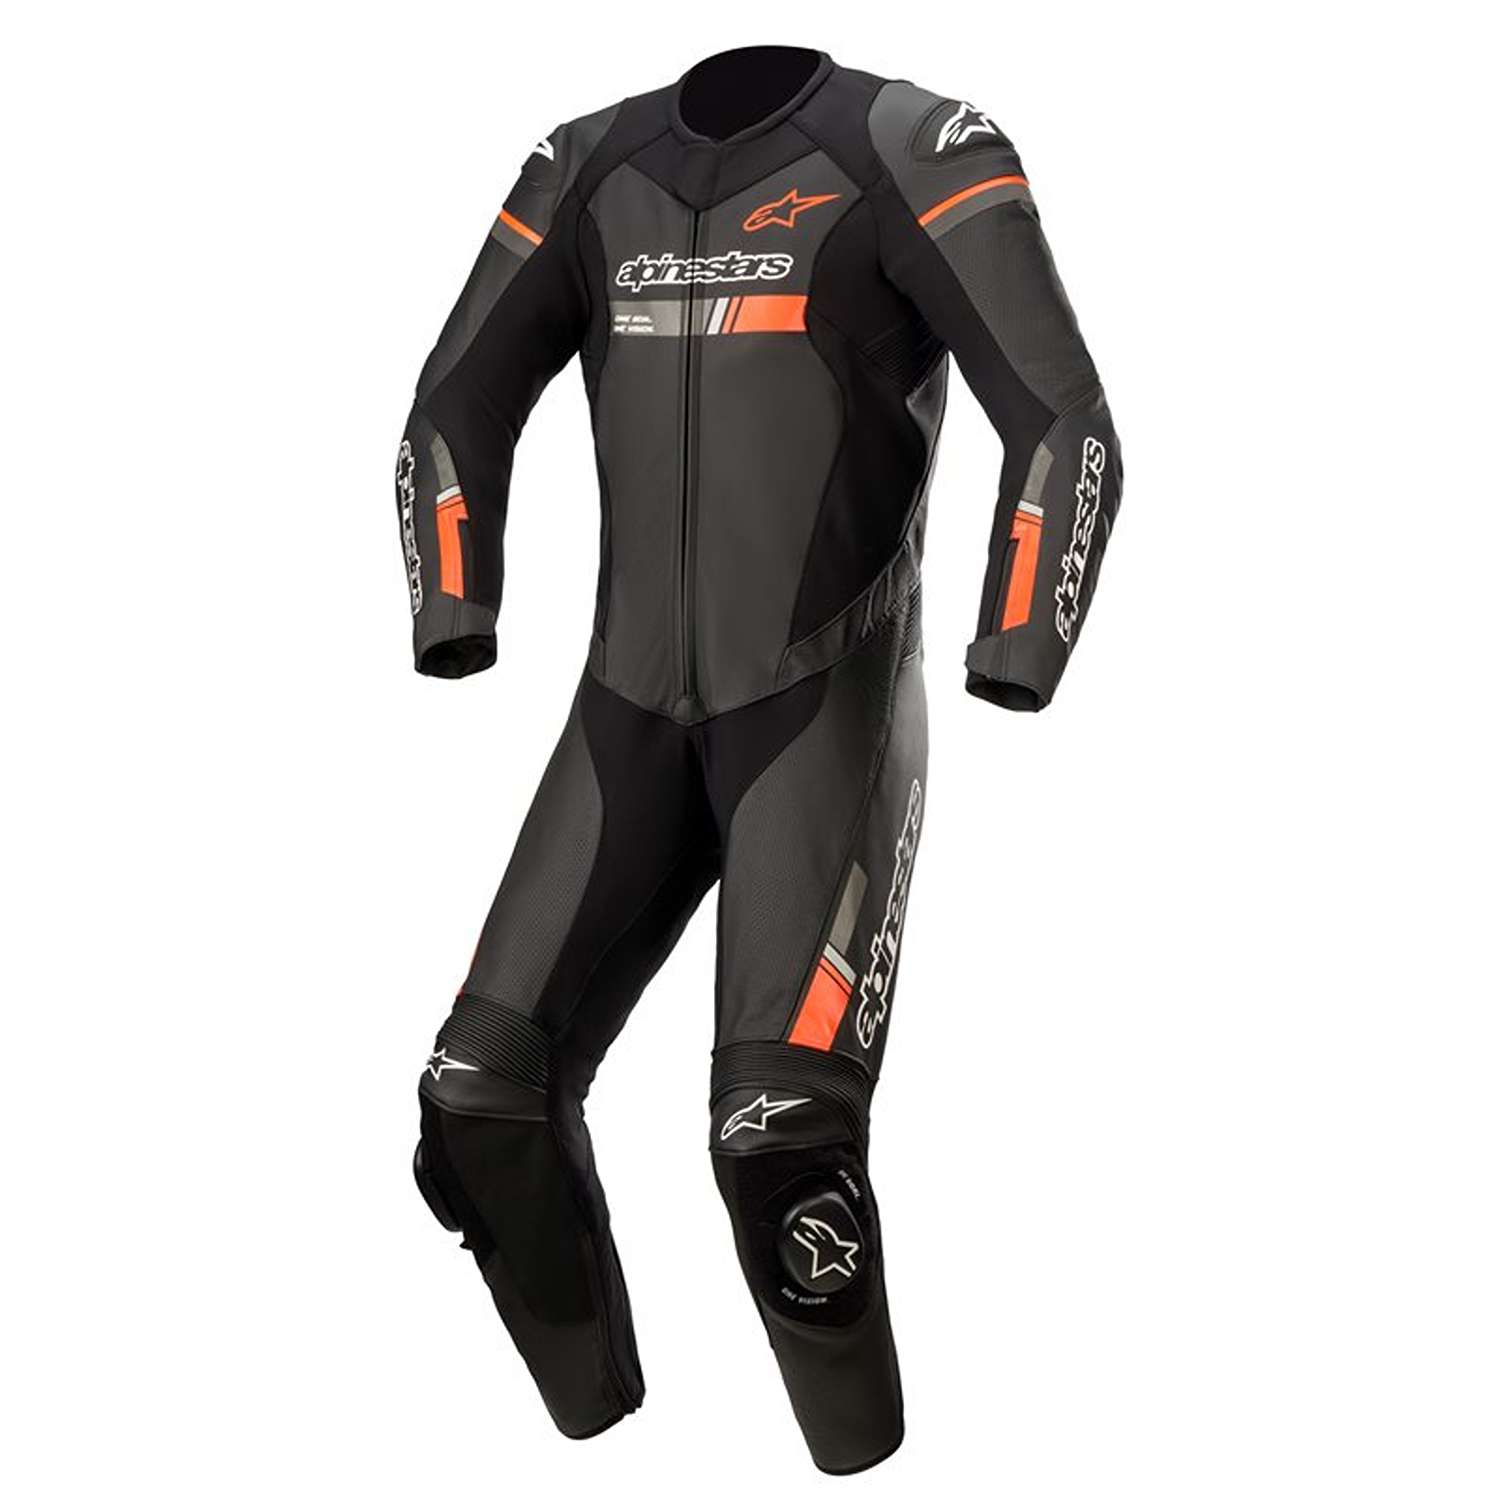 Image of Alpinestars Gp Force Chaser Leather Suit 1 Pc Black Red Fluo Size 52 ID 8059175351495